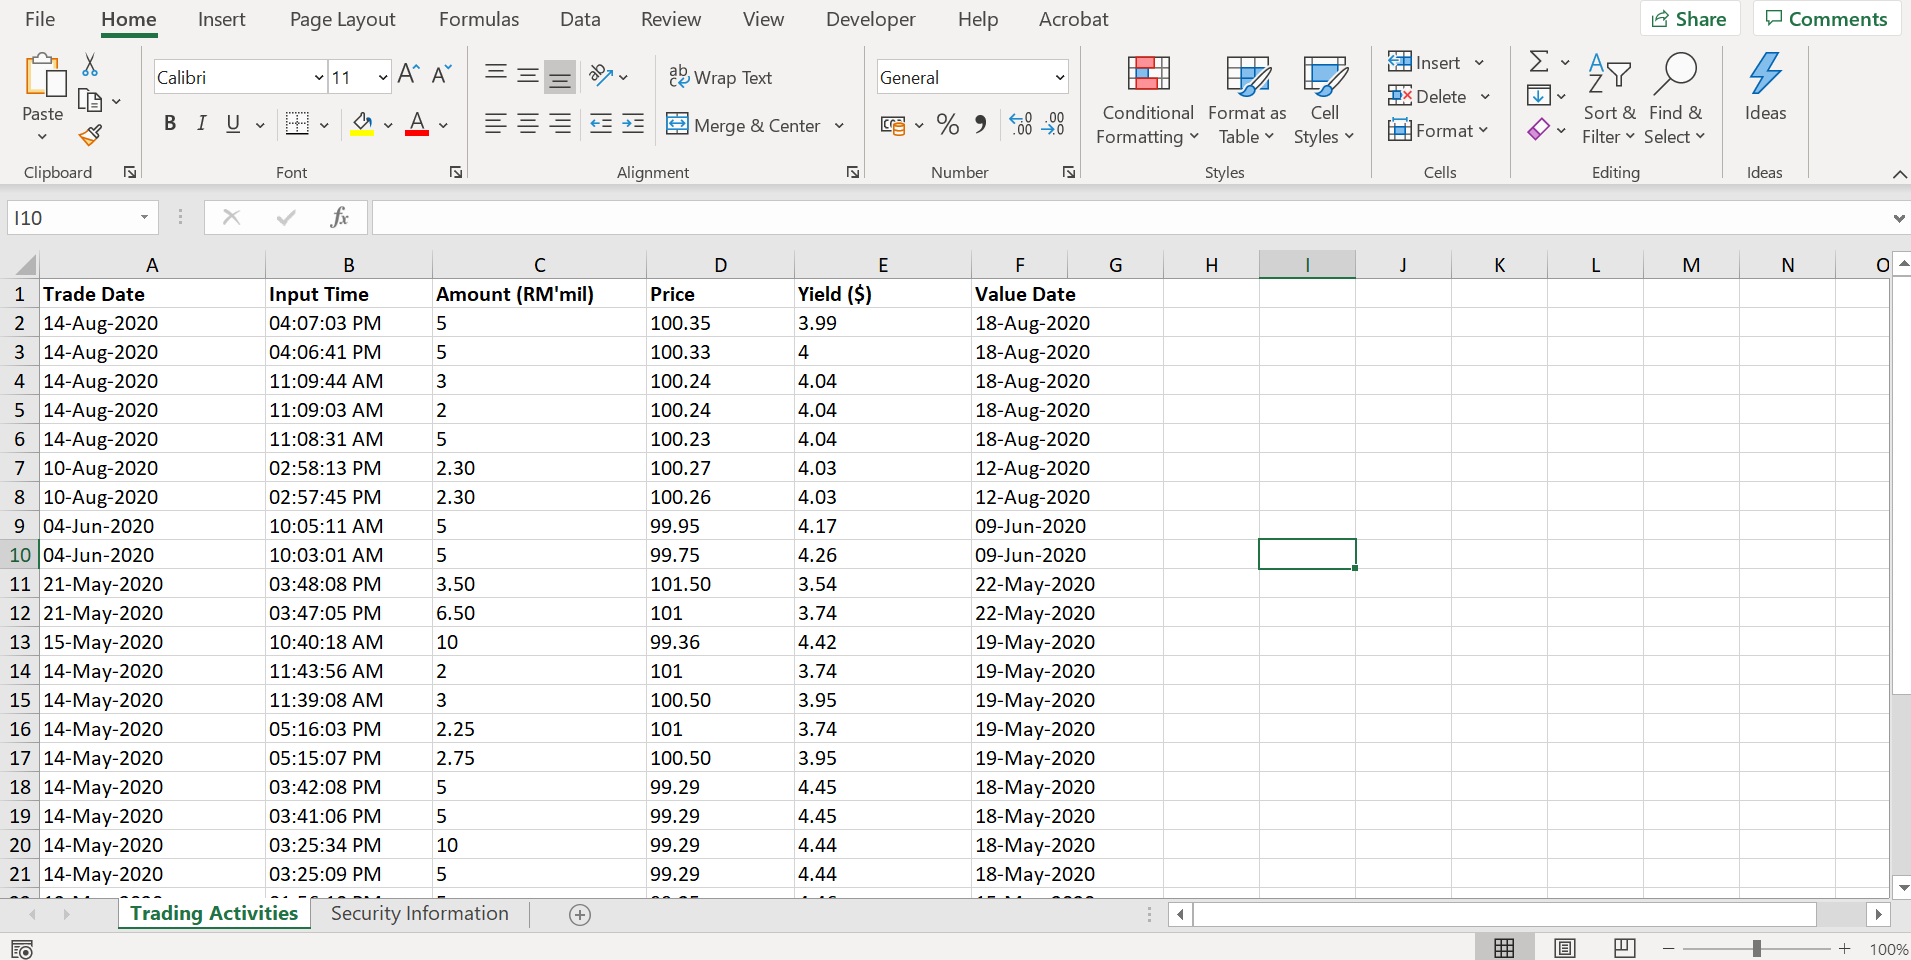 Figure 11: Trading Activities Exported to Excel